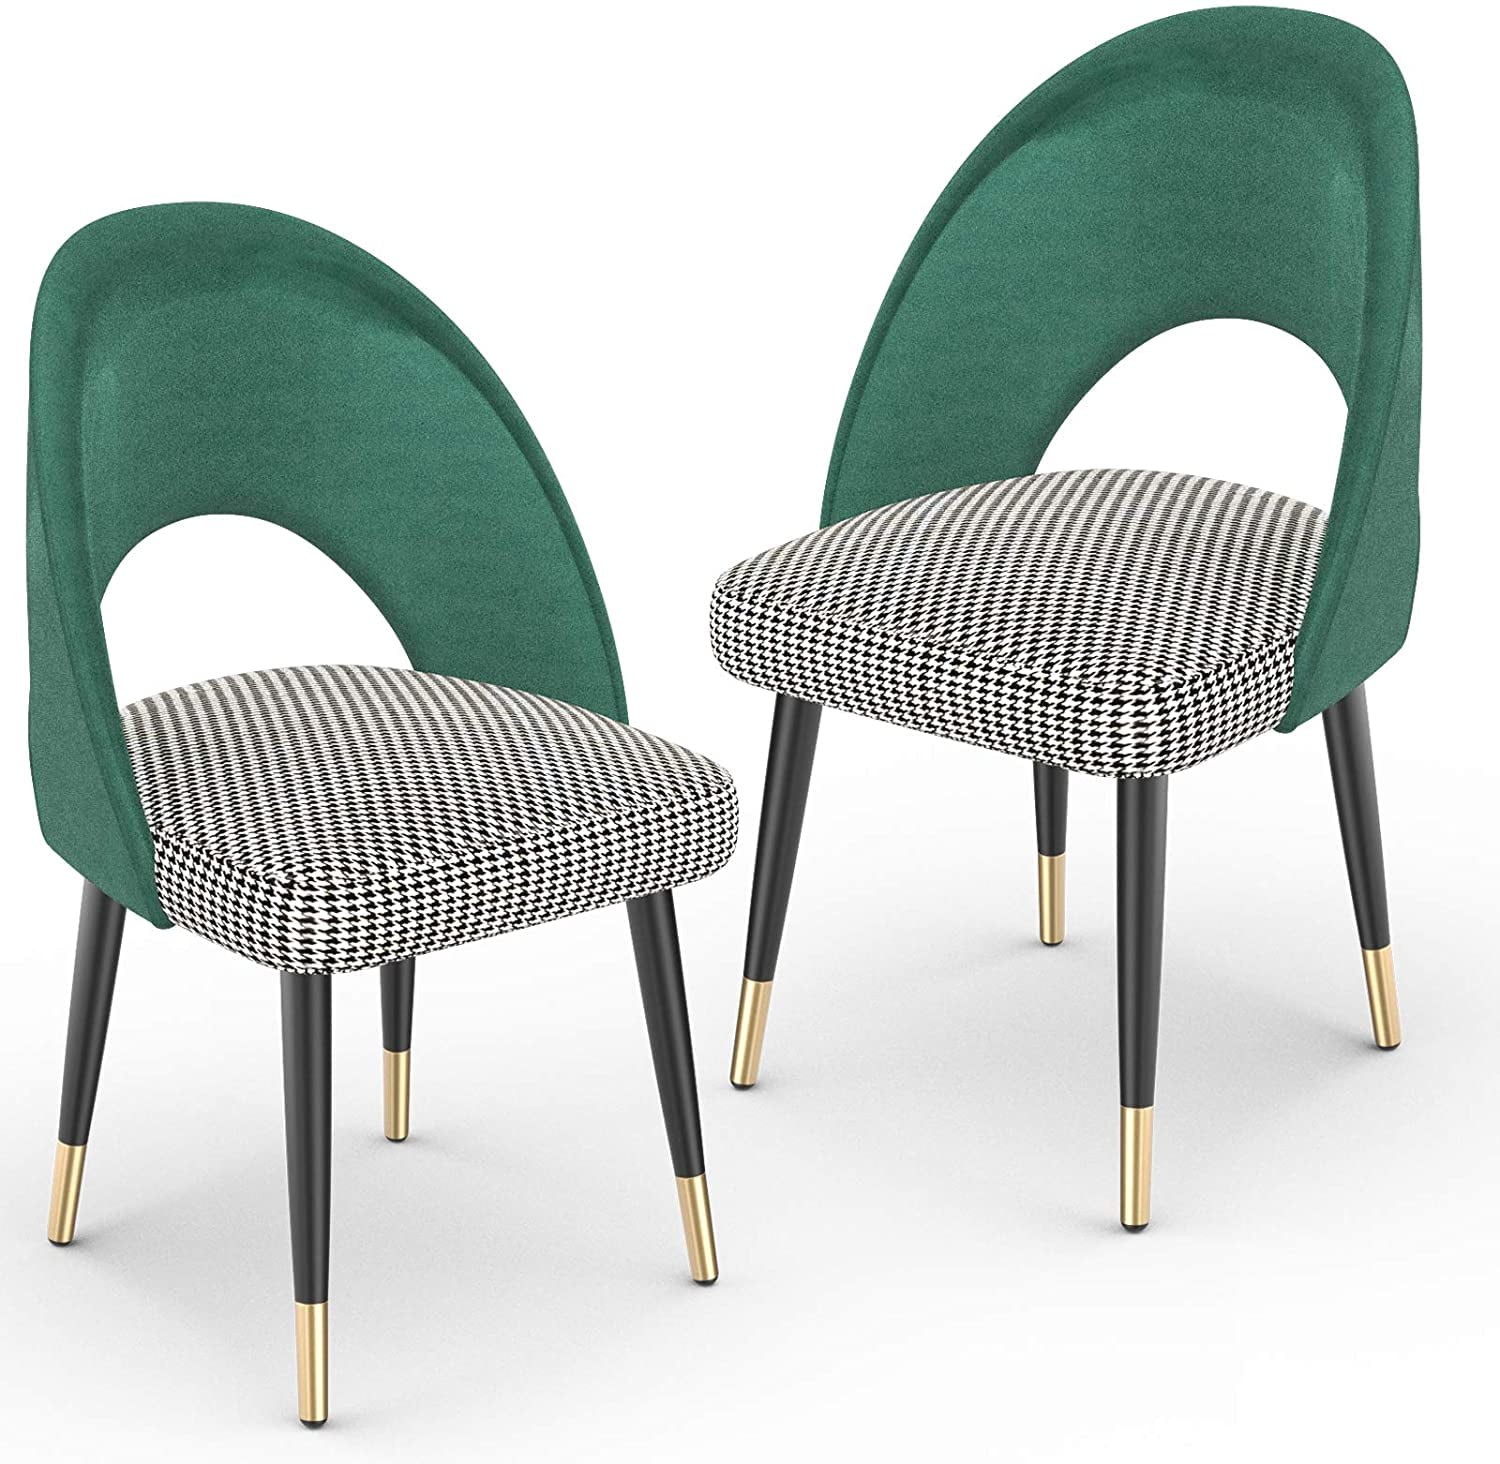 Color : 005 Dining Chairs Set of 2 Kitchen Chairs Soft Velvet Seat and Back Metal Legs Dining Room Living Room Chair